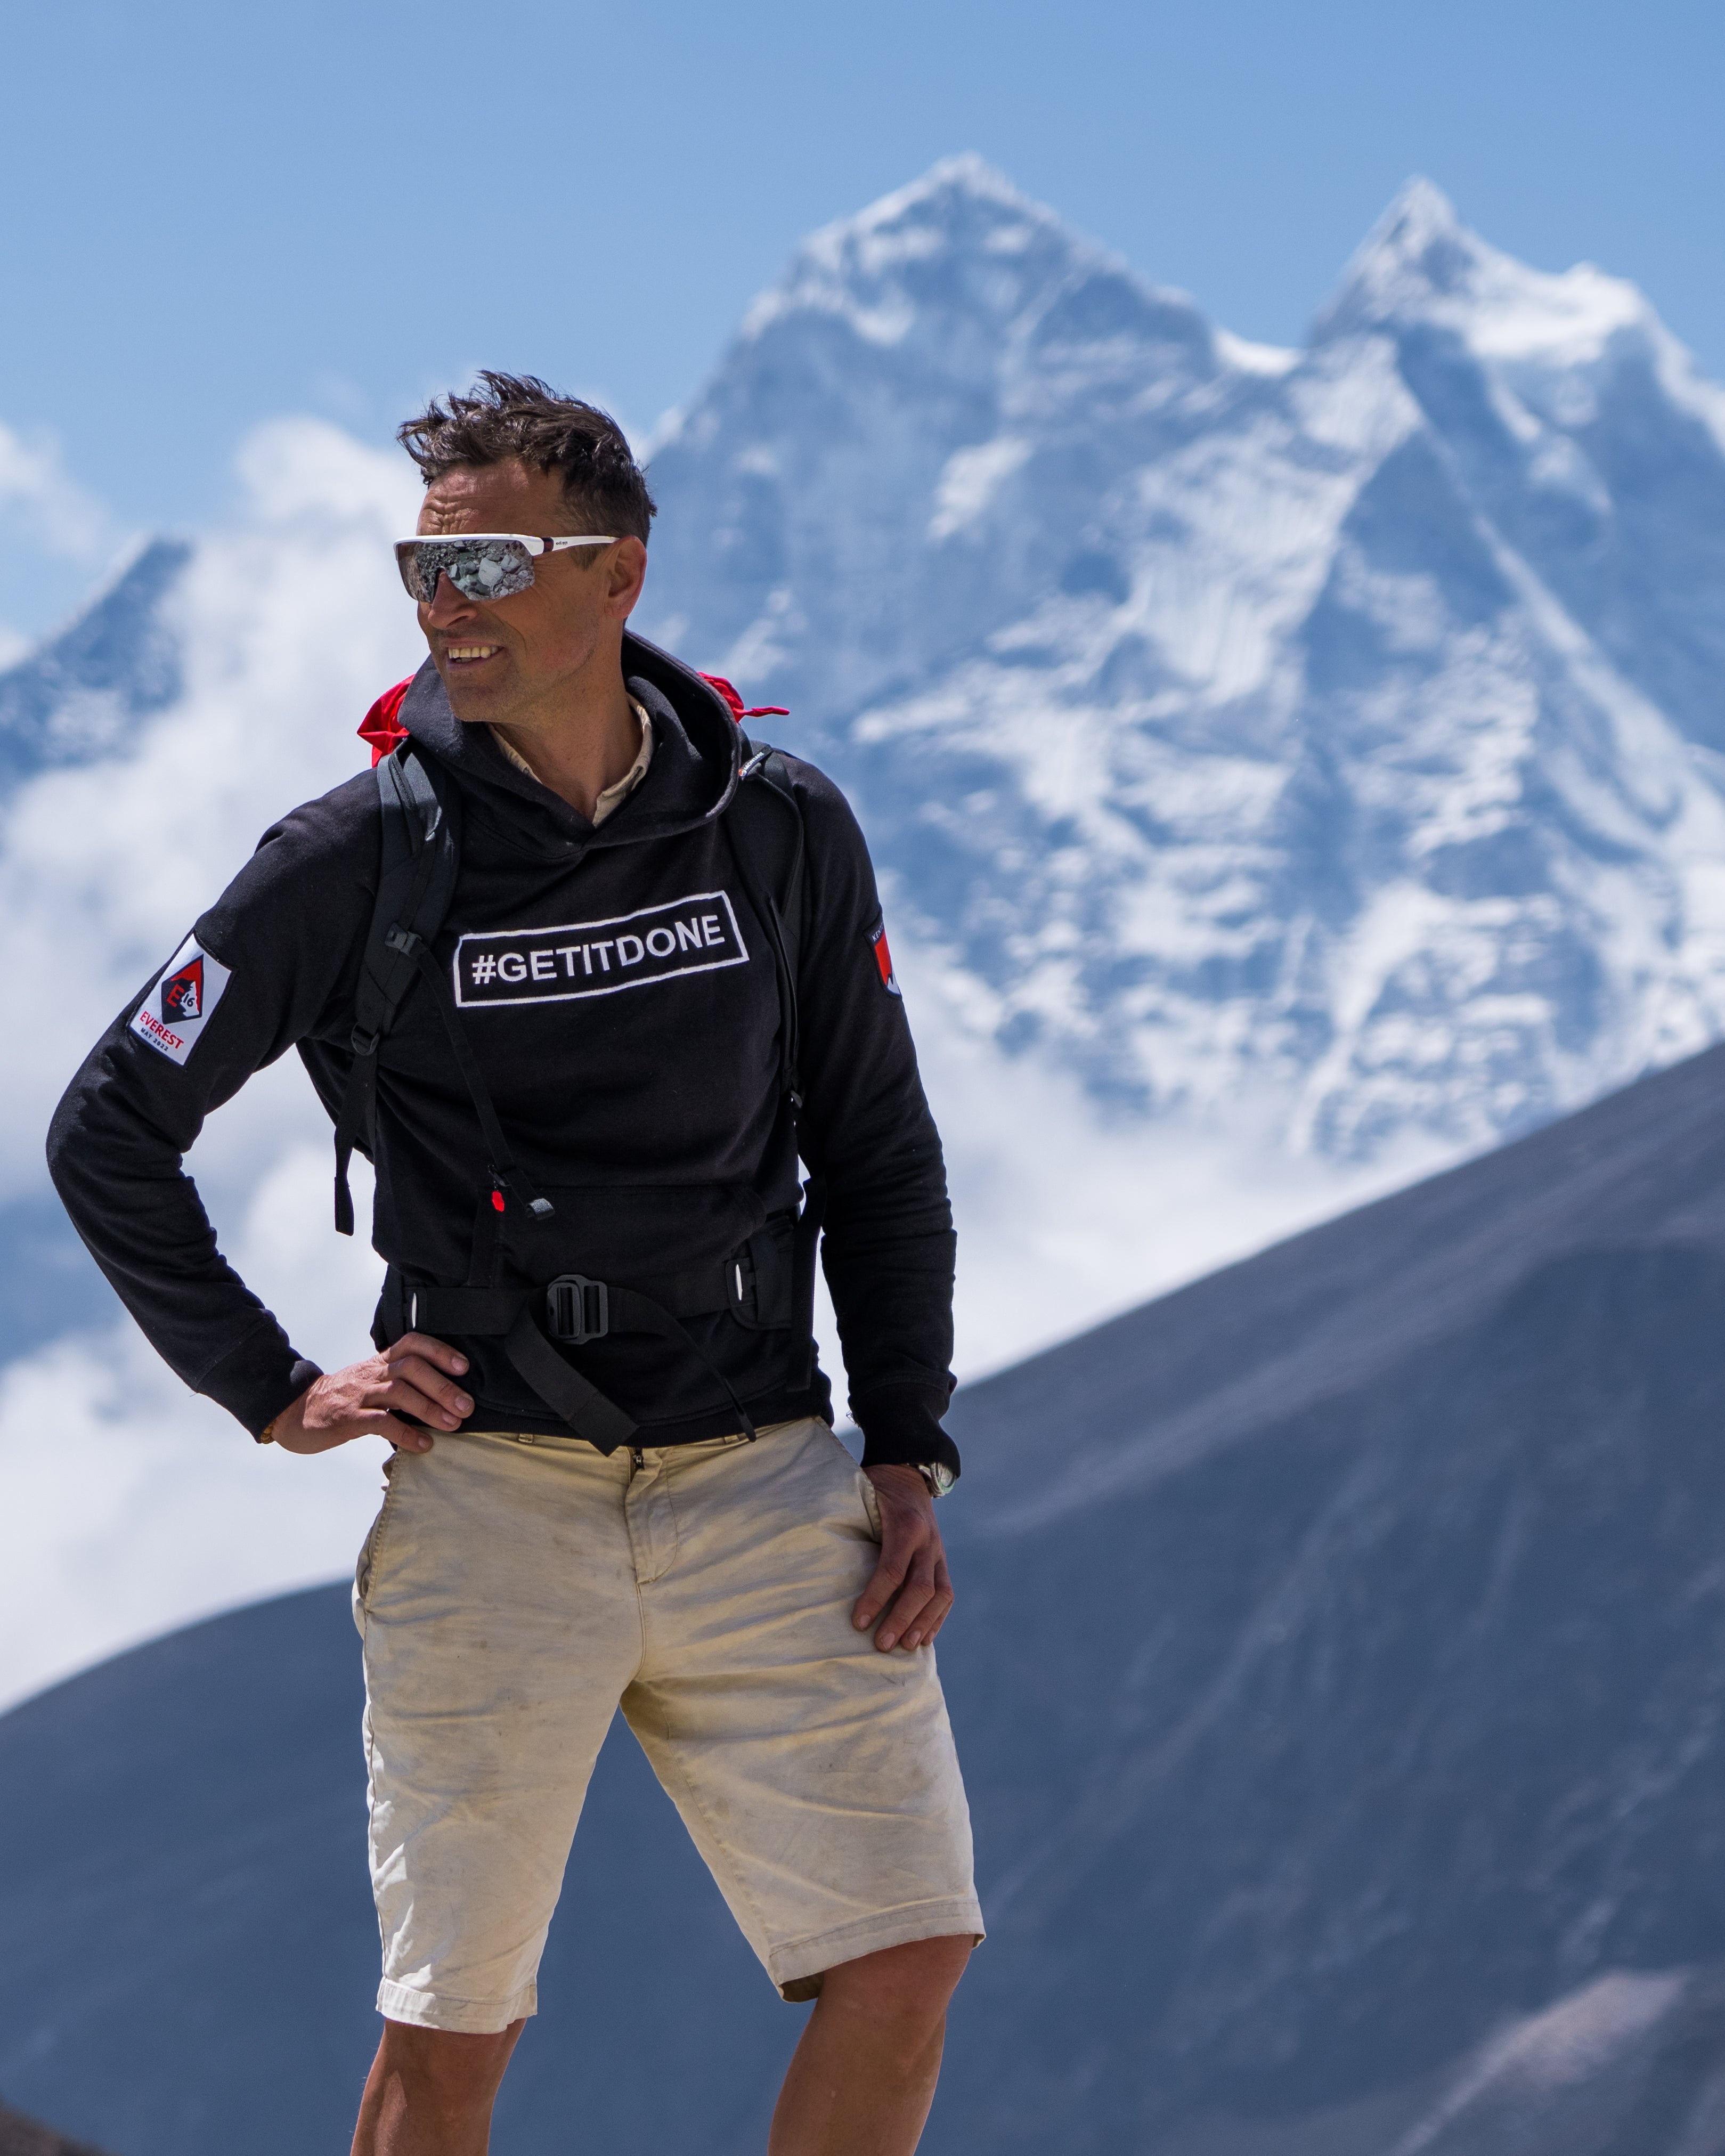 Kenton Cool will be the first non-sherpa to reach the 8,849-metre summit for the 16th time (Elia Saikaly)